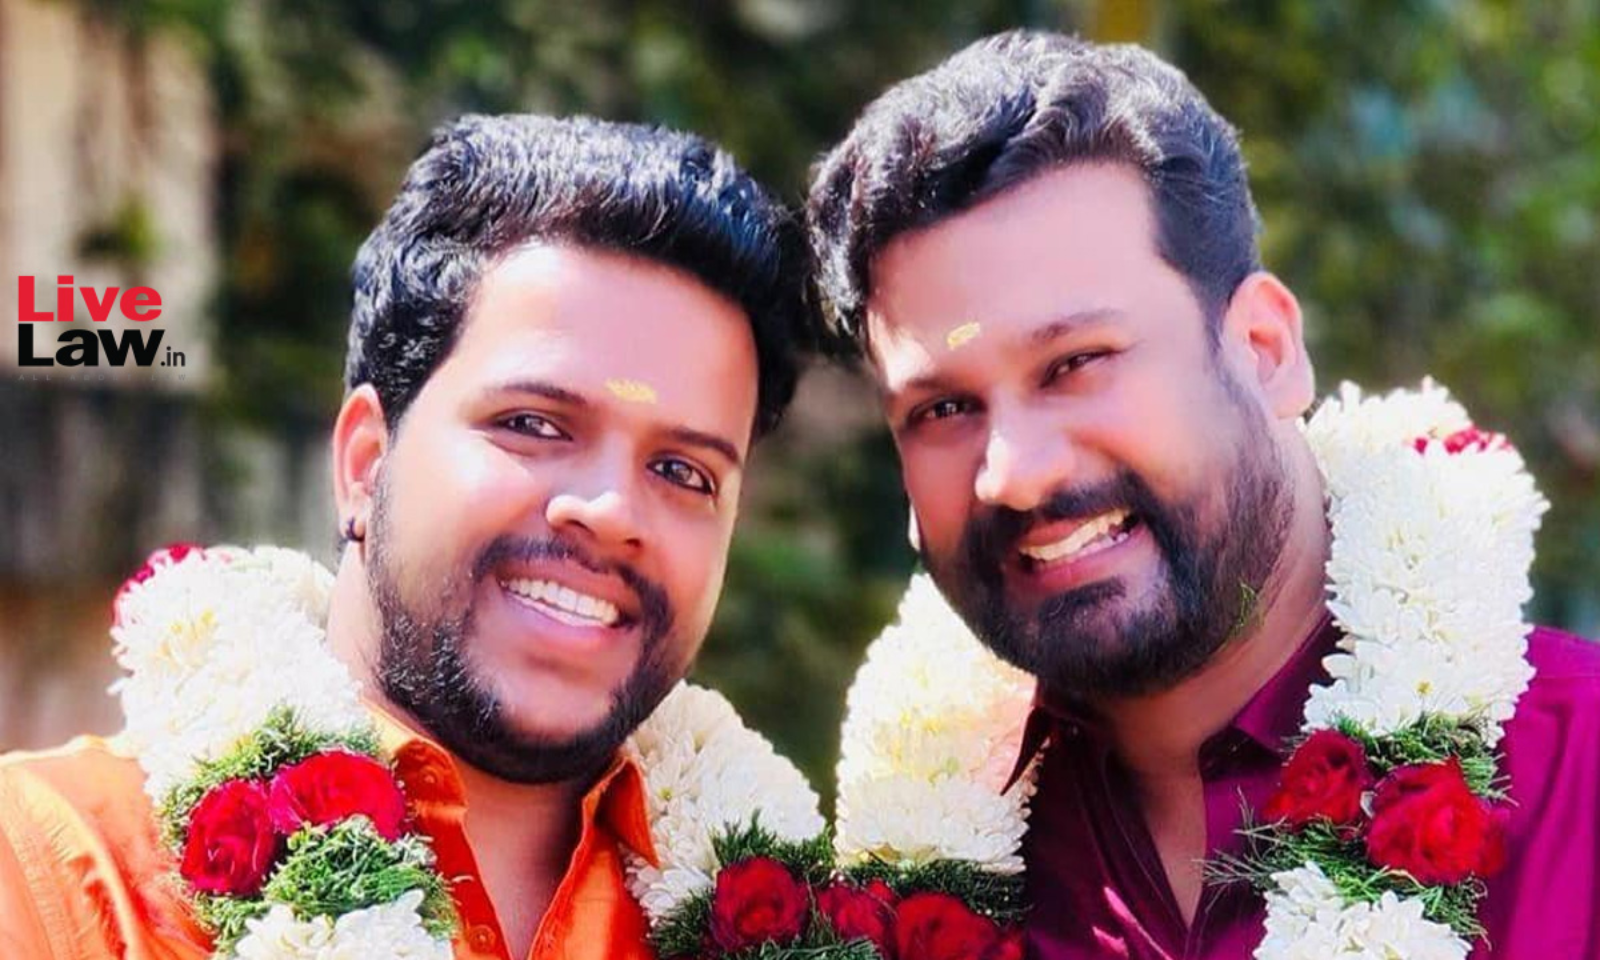 Legalising Same-Sex Marriages : Interview Of Kerala's First 'Married' Gay  Couple